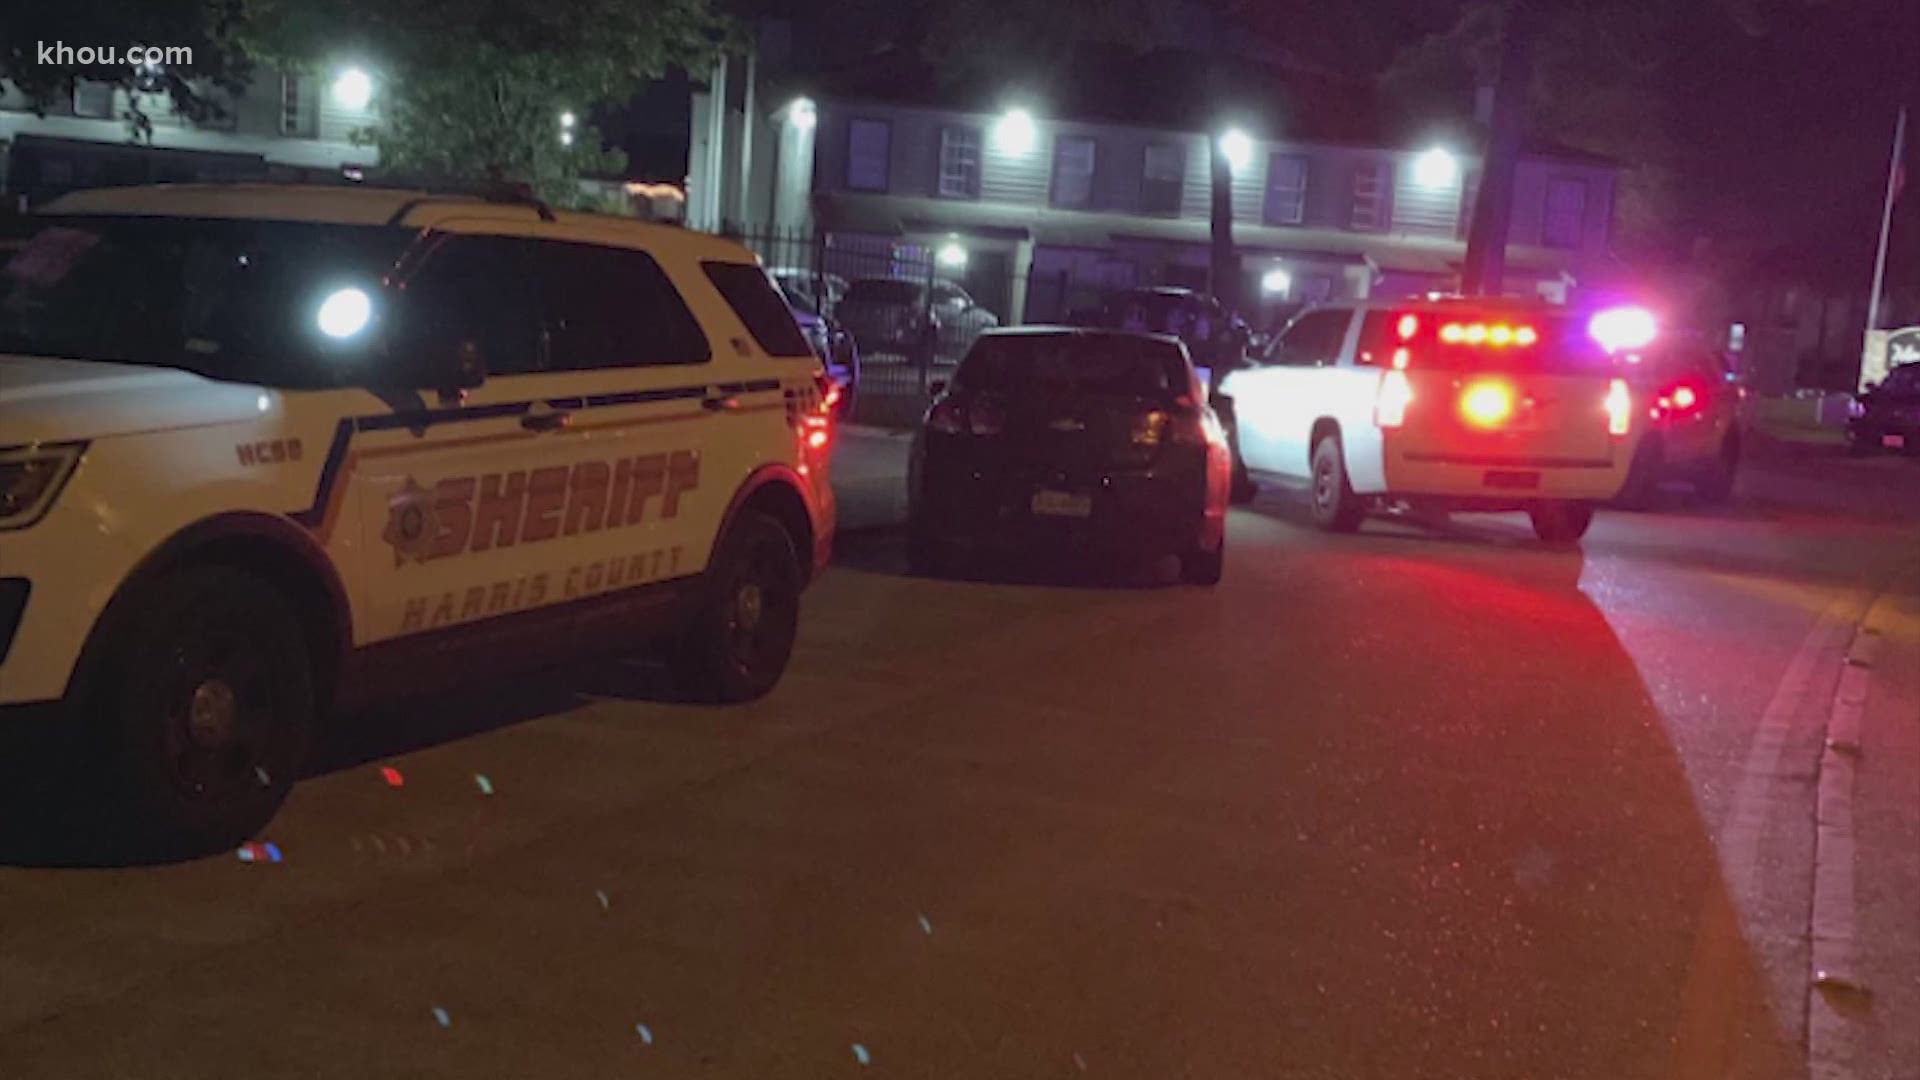 A man was found shot to death in the parking lot of an apartment complex in northwest Harris County. The motive behind the shooting is unknown at this time.